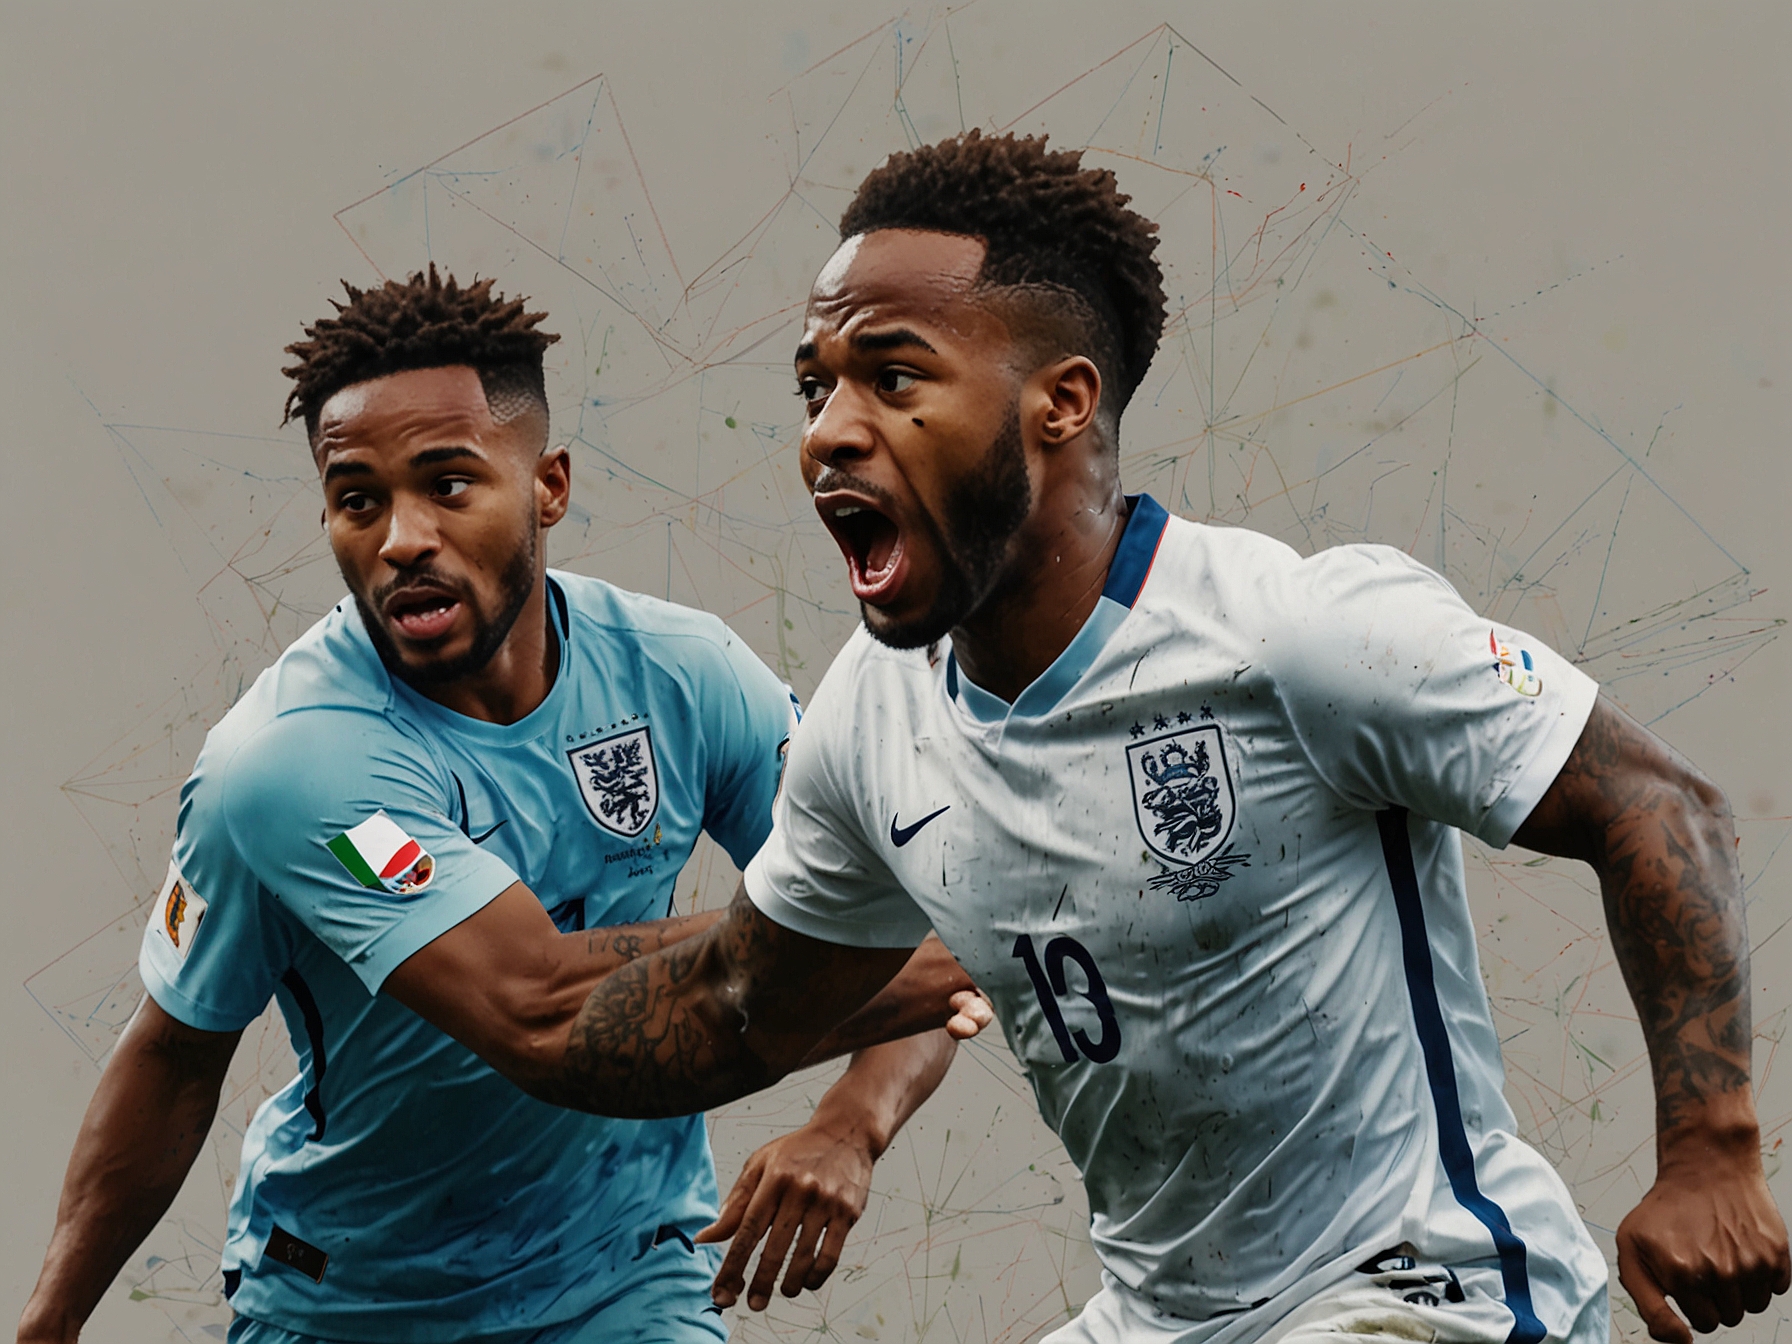 An image depicting Raheem Sterling crowded out by Slovenia's defenders while playing in an unfamiliar central role, showcasing the disjointed nature of England's attacking strategy in the game.